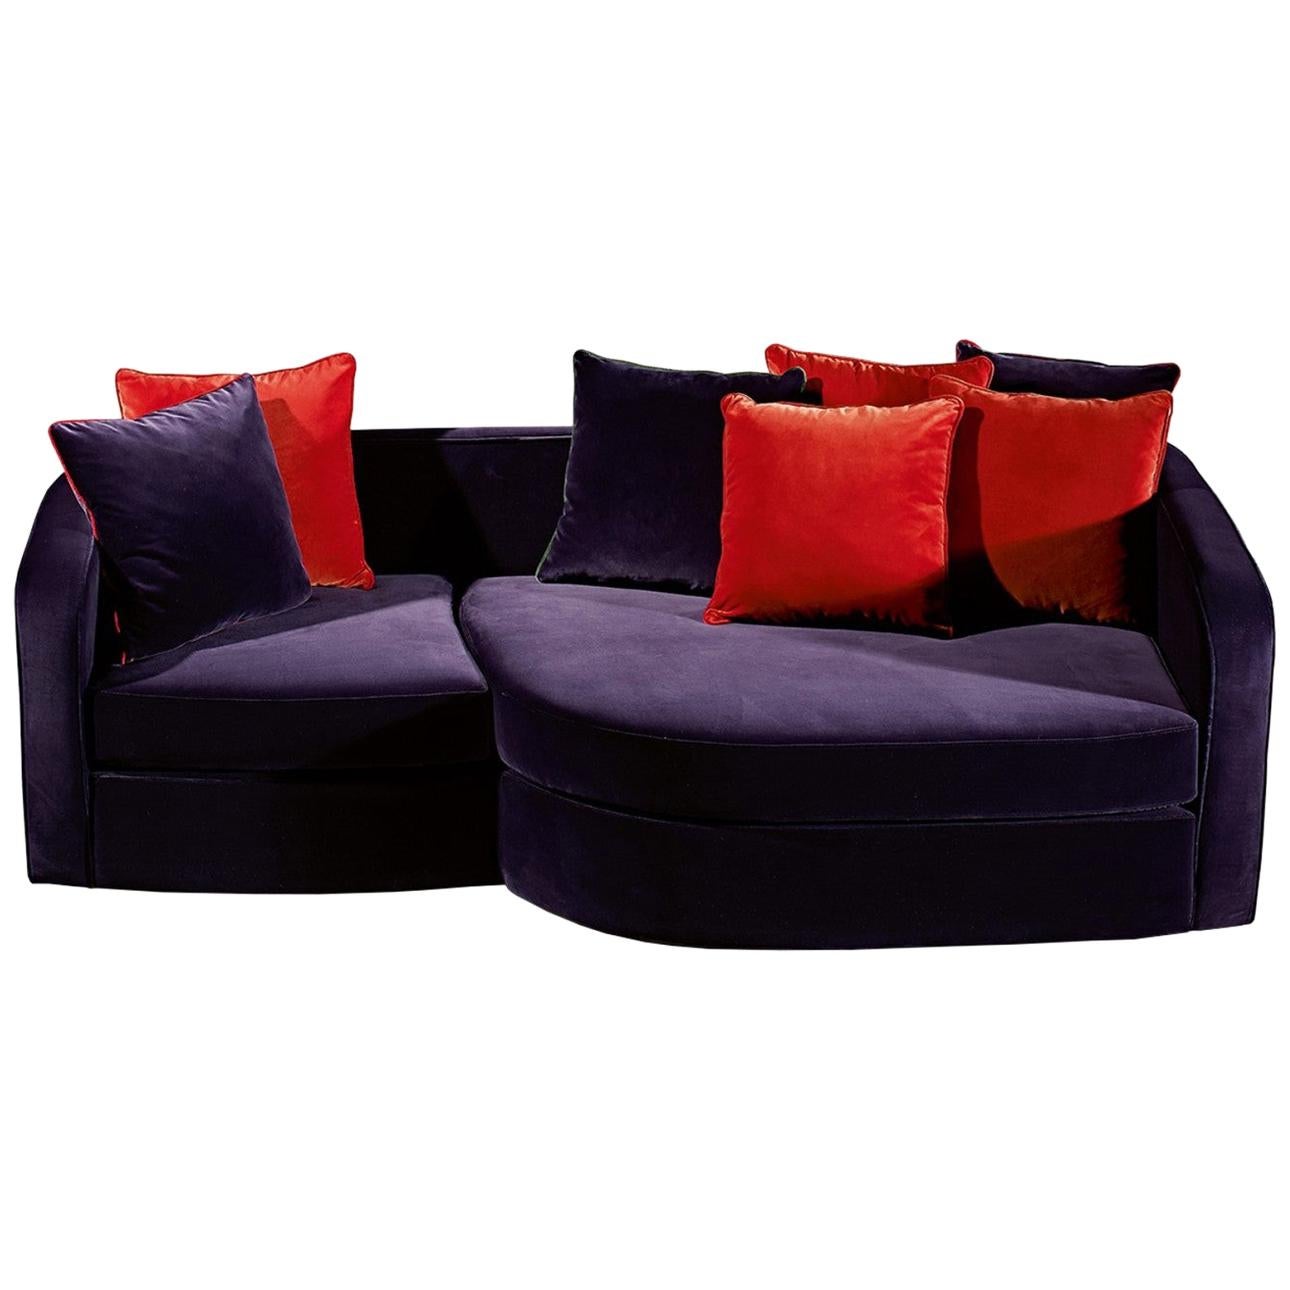 Audrey Contemporary and Customizable Sofa by Luísa Peixoto For Sale